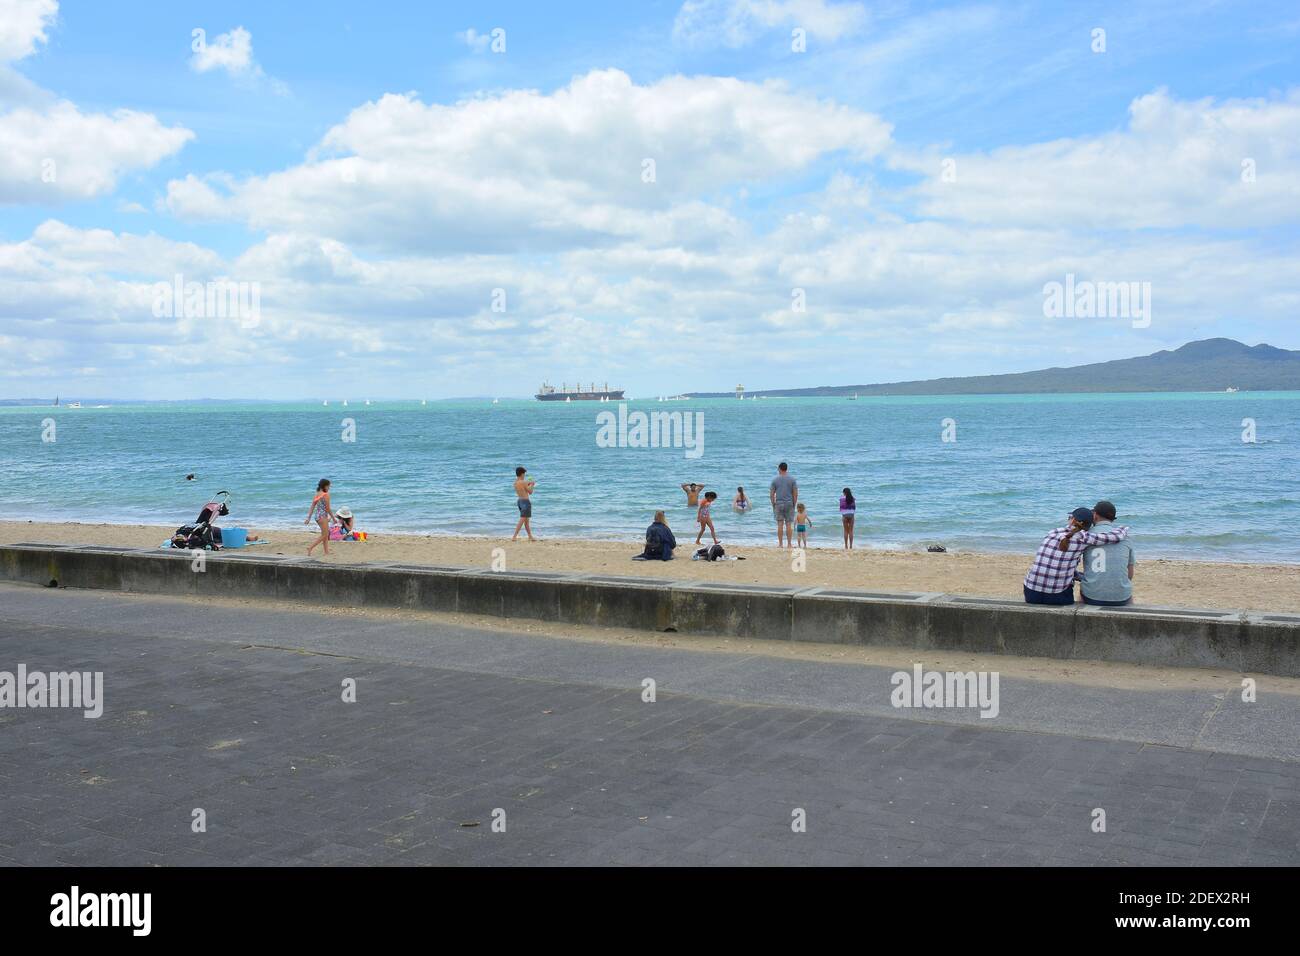 AUCKLAND, NEW ZEALAND - Nov 21, 2020: View of people at Mission Bay beach with Rangitoto Island in background Stock Photo